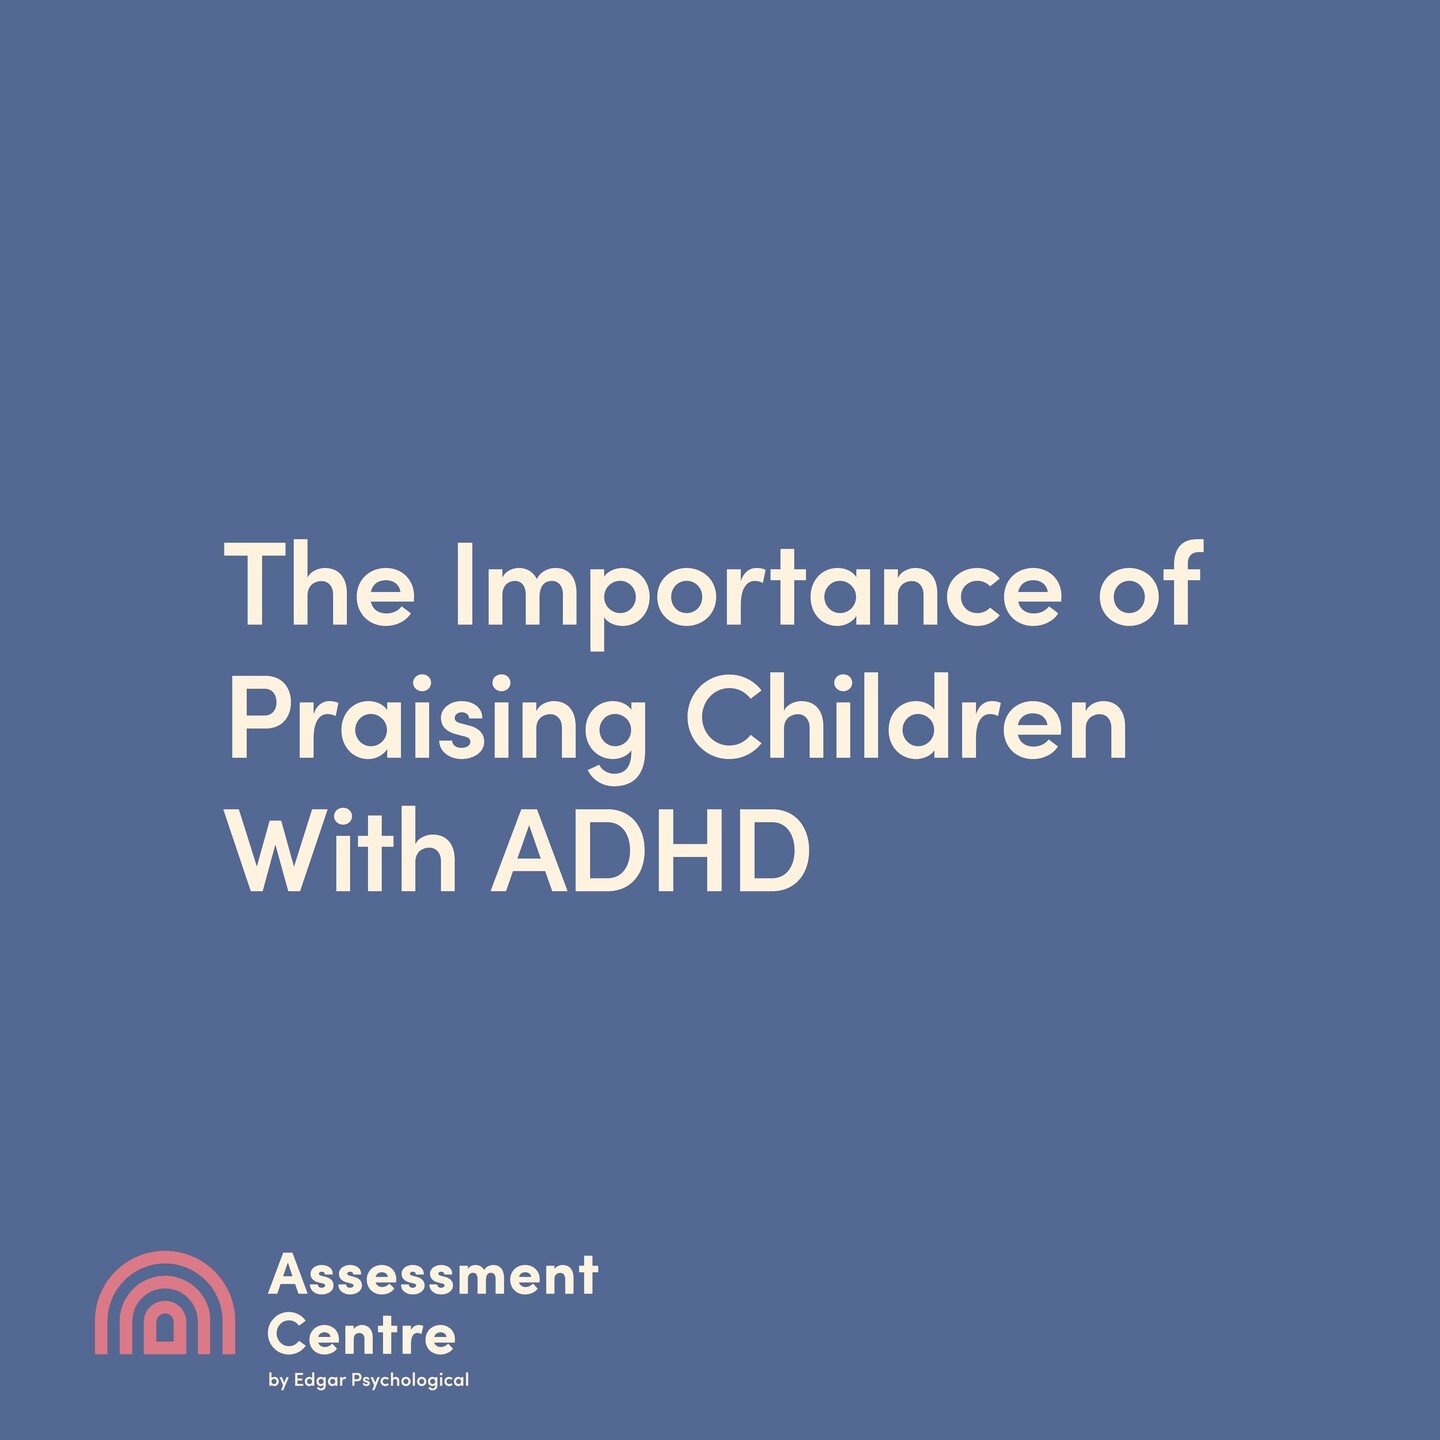 Children with ADHD may hear frequent corrective or negative messages. Some psychiatrists estimate that children with ADHD will hear 20,000 negative messages by the time they turn 12.

Focusing on the positives and giving specific praise can help redu